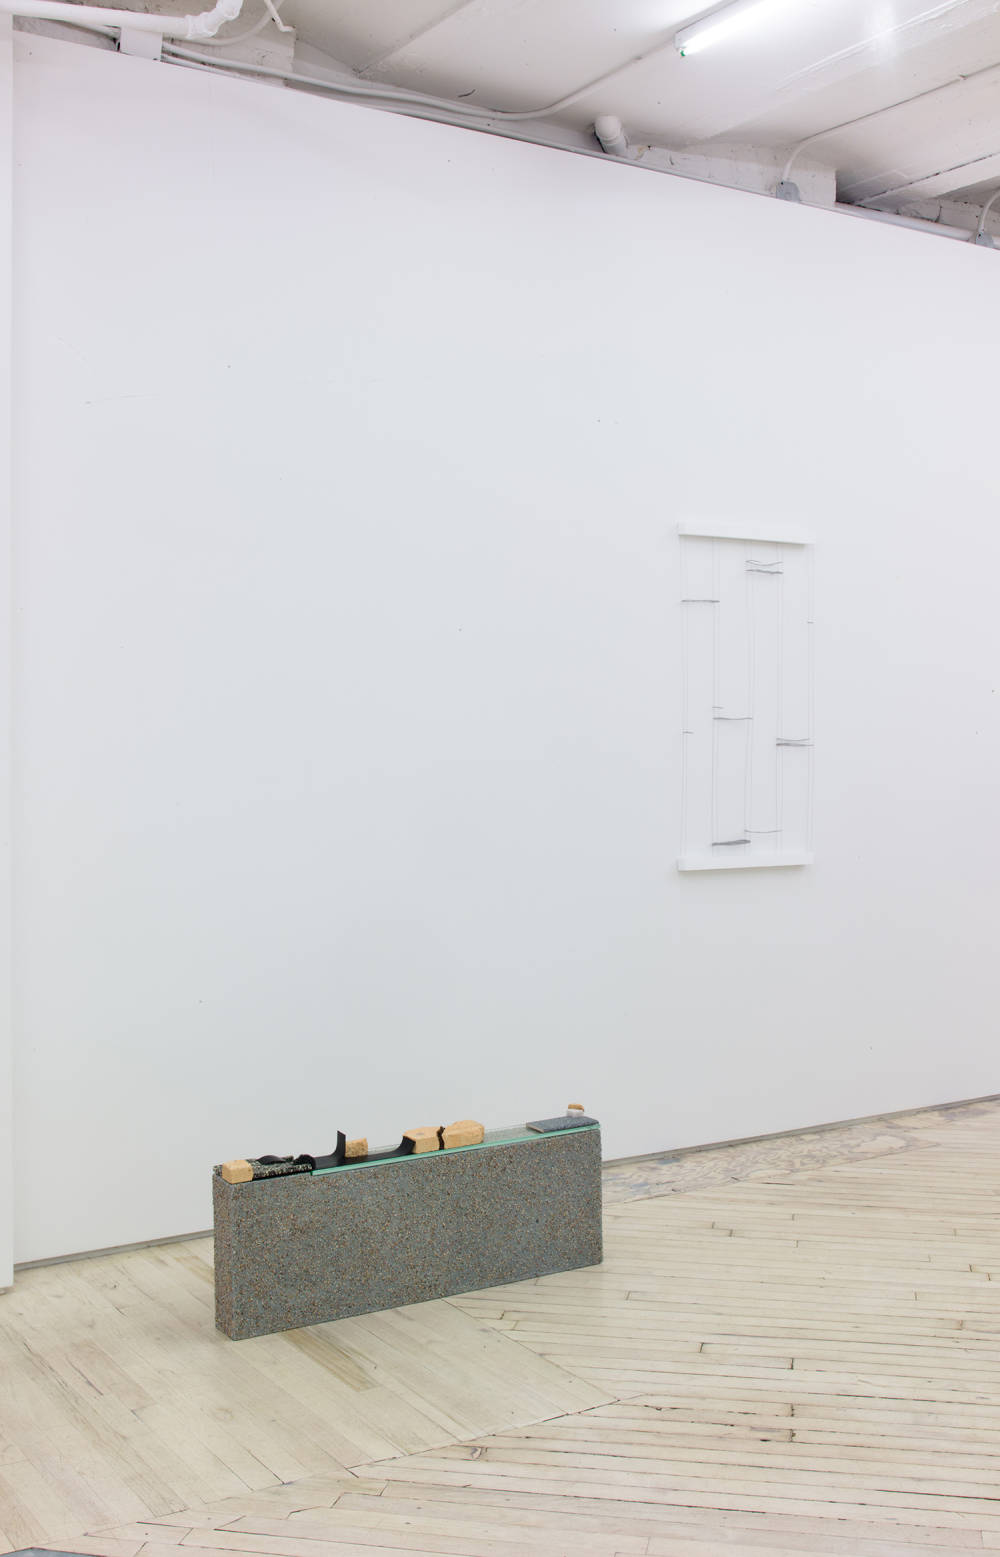 In a gallery space are two objects. The object in the foreground is a small, rectangular, architectural structure, resting on the floor. To the right is an abstract, wooden object hung on a white wall. 